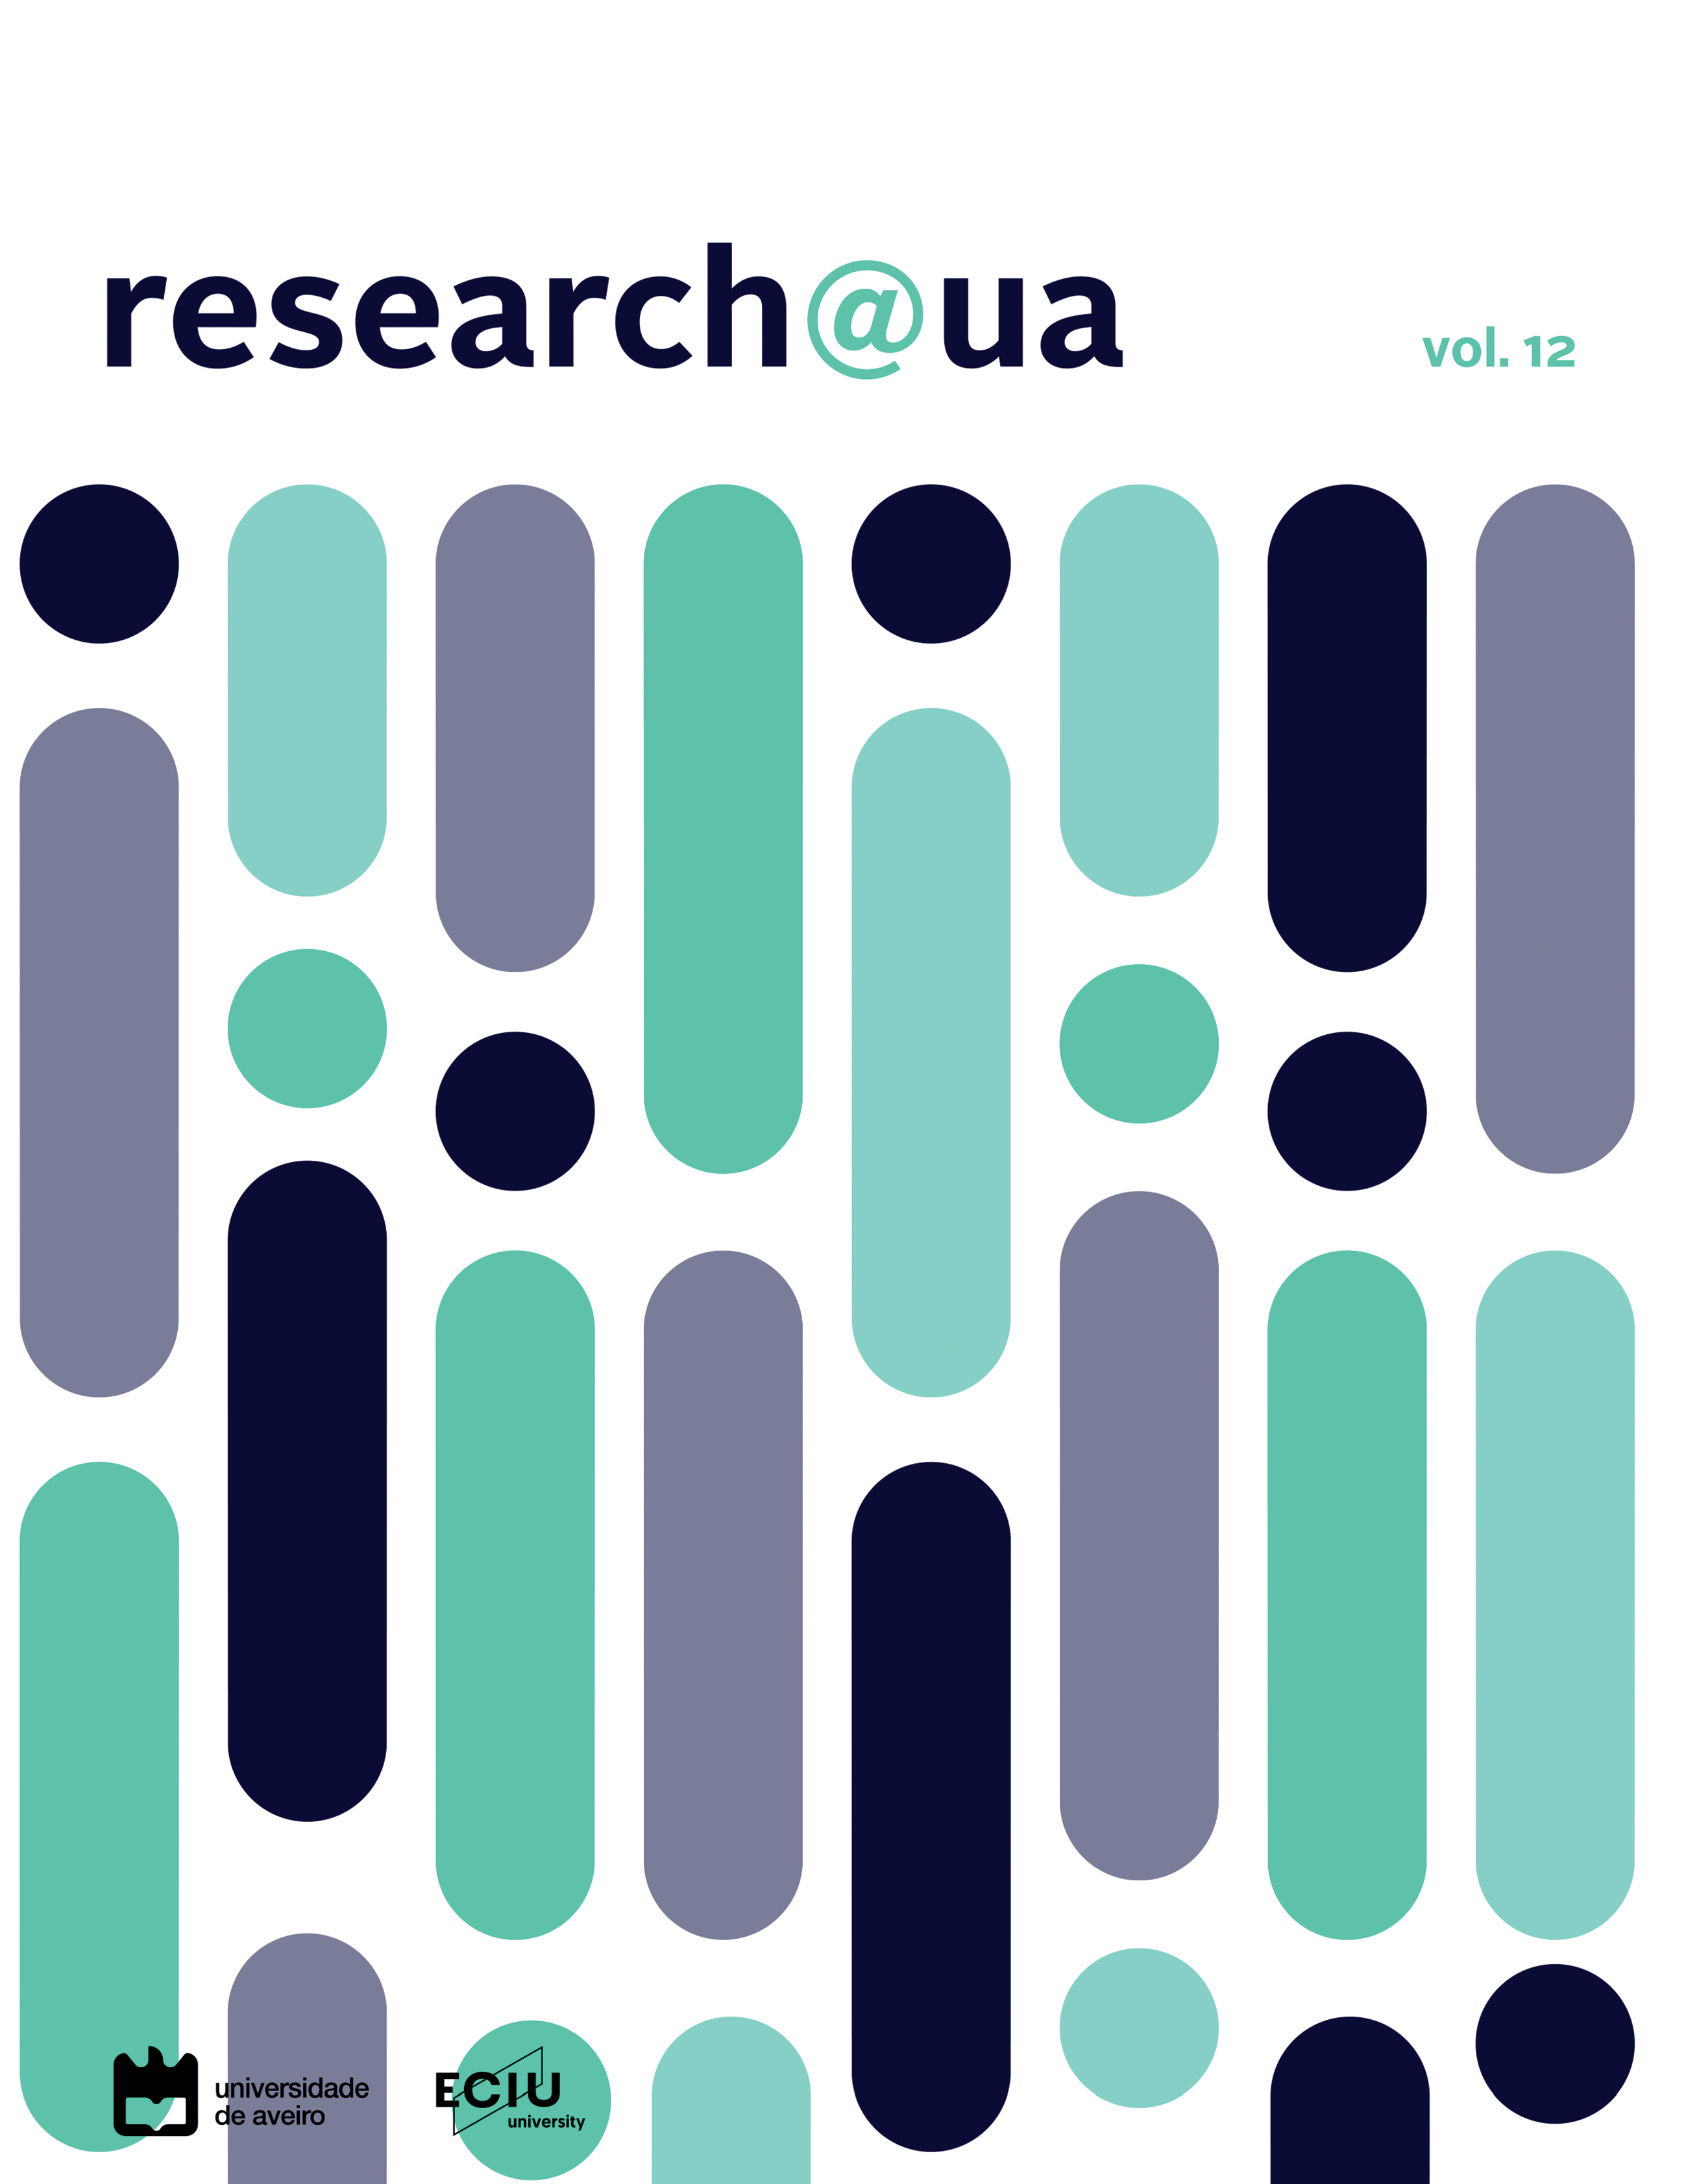 Cover of volume 12 (2021) of research@ua journal